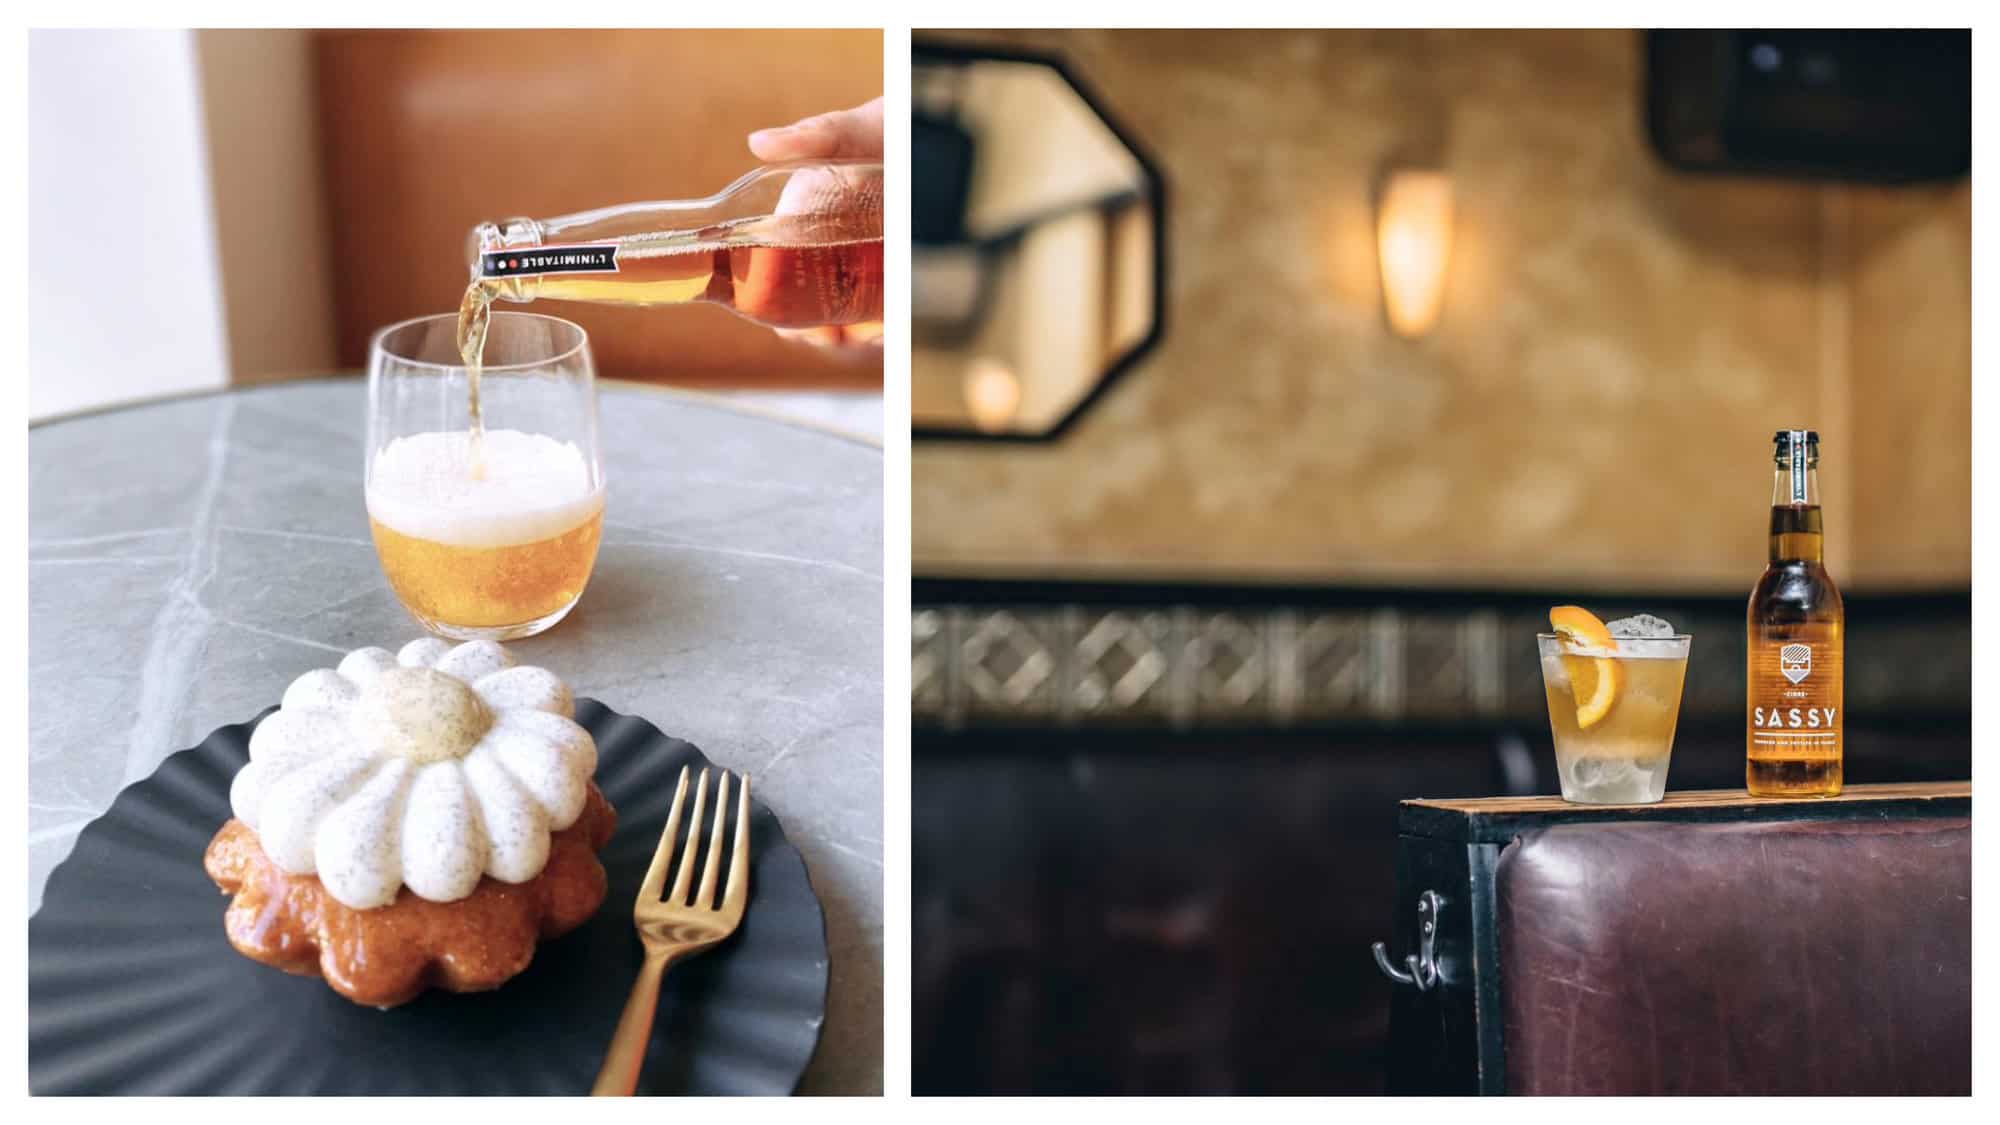 Left: a hand pouring a glass of cider with a dessert in front.
Right: a glass of Maison Sassy cider and the bottle in a bar.